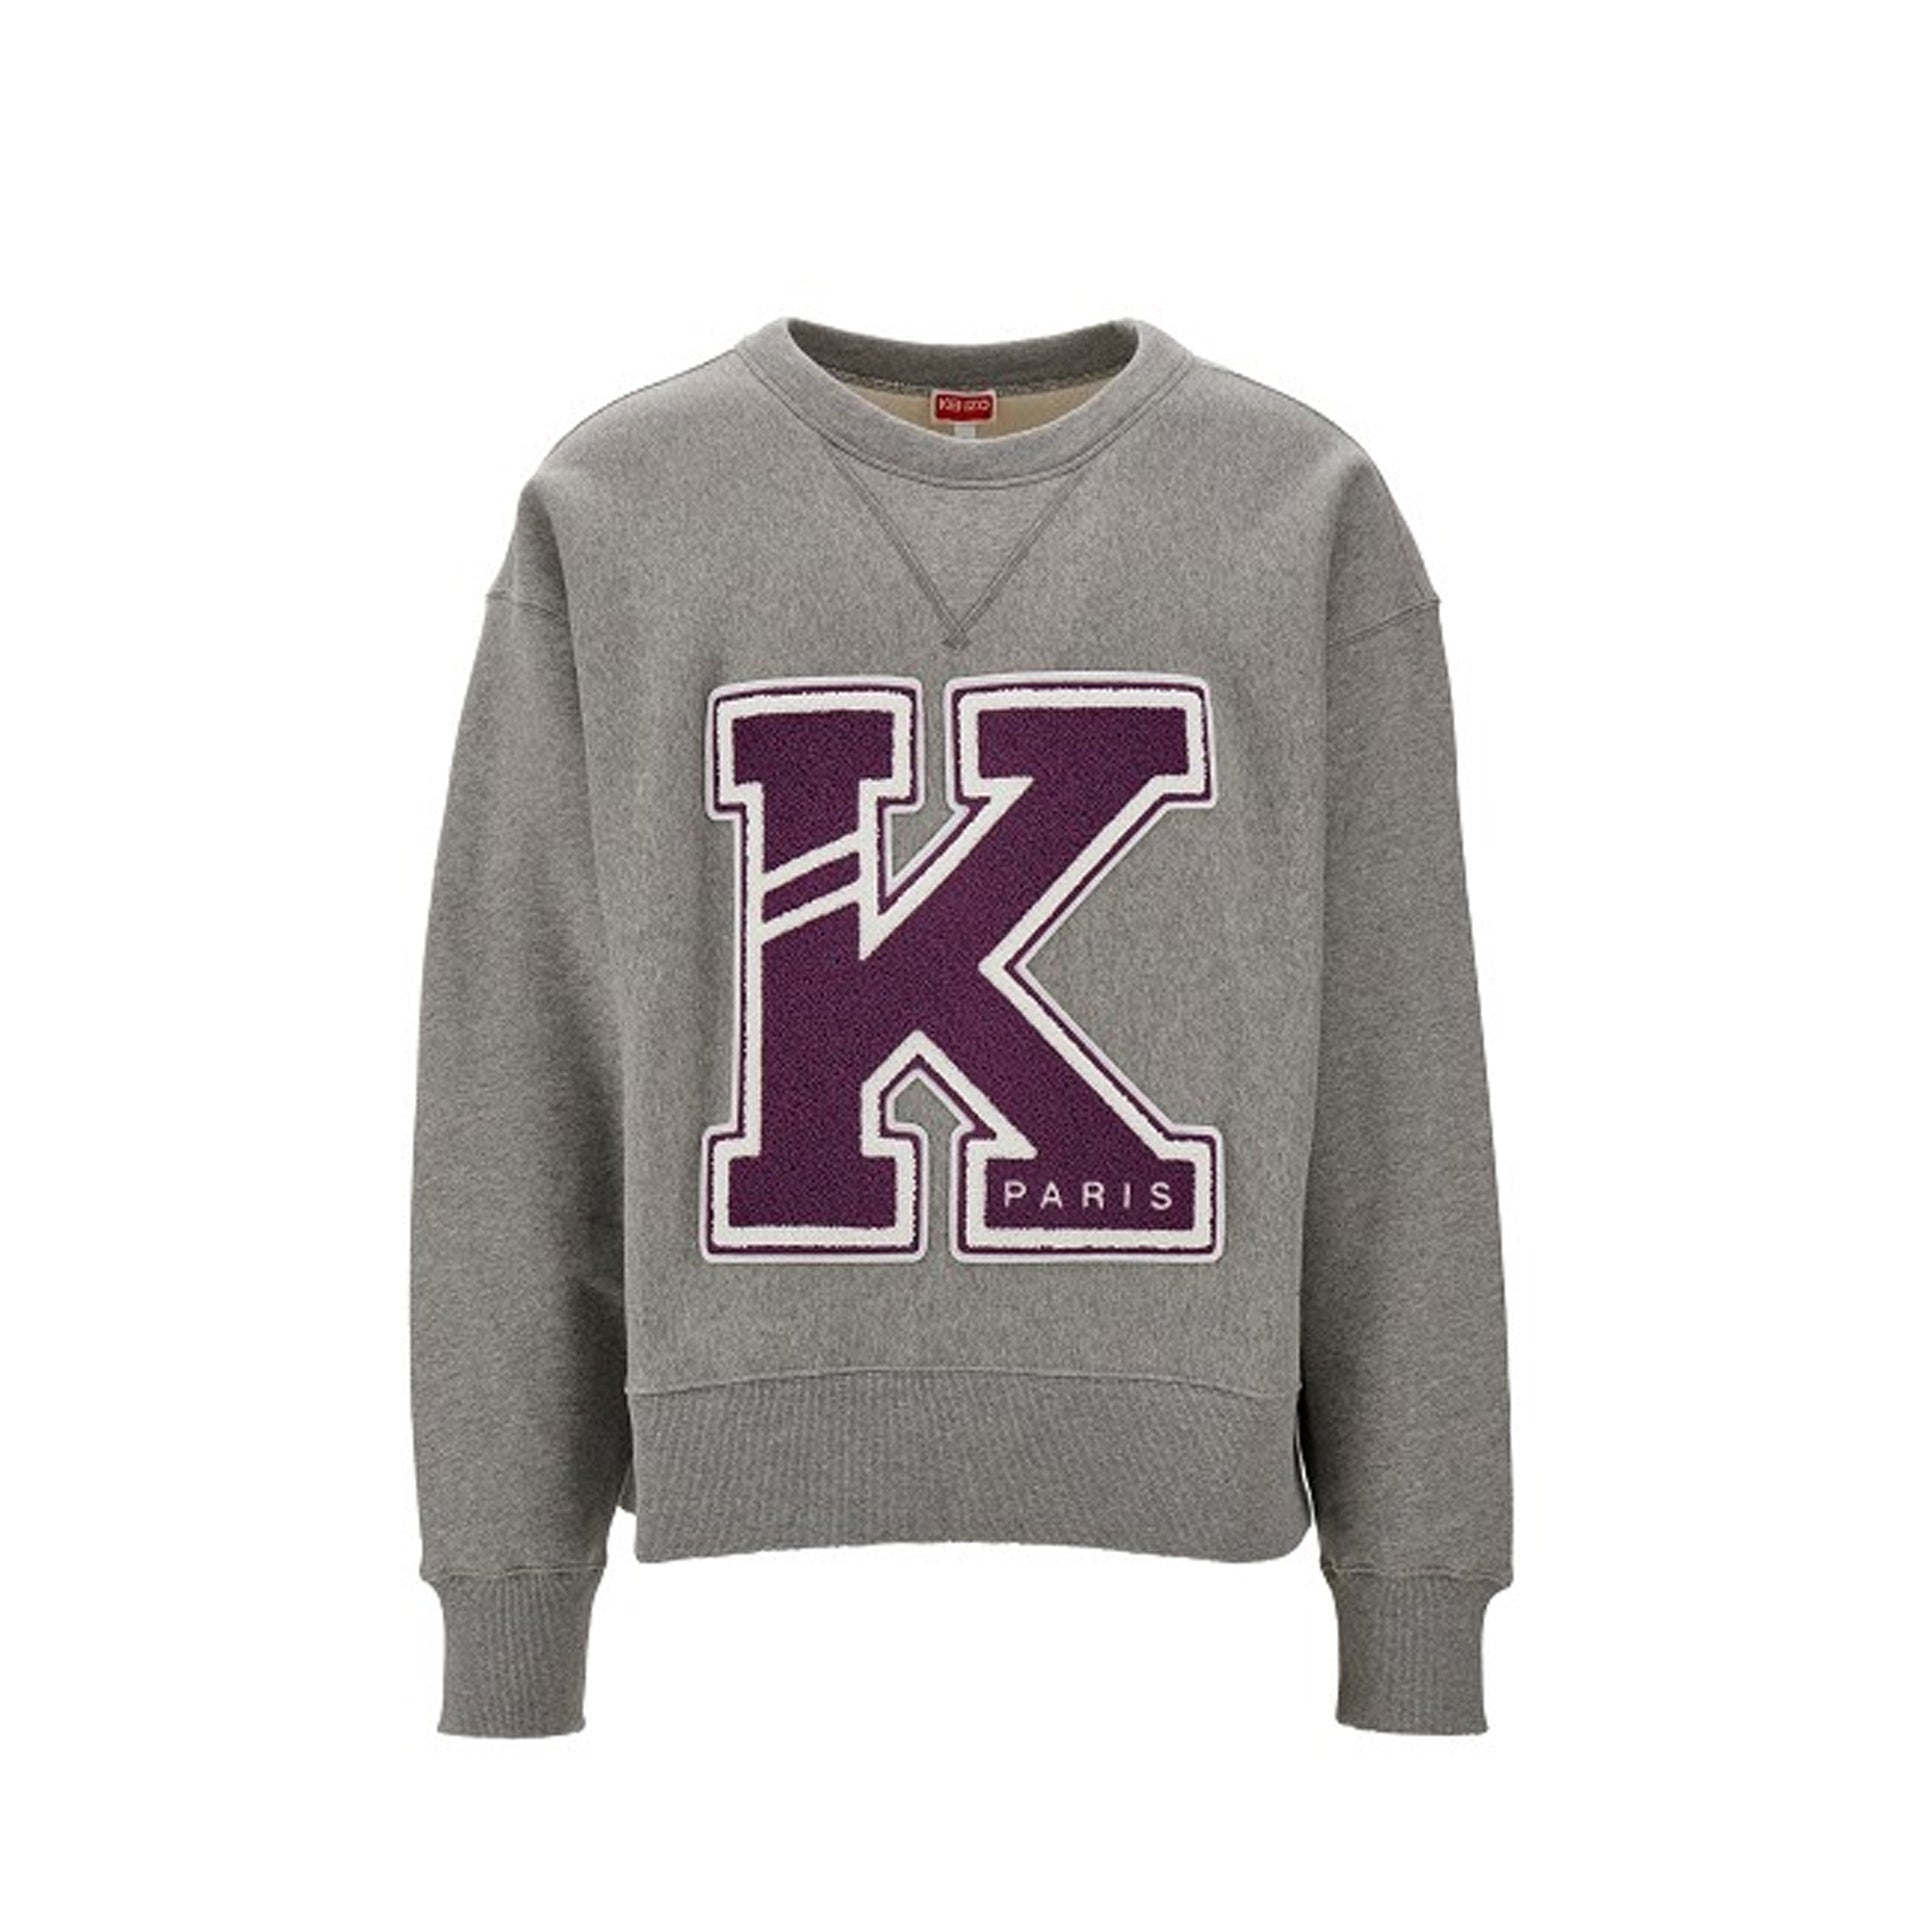 KENZO-OUTLET-SALE-KENZO-Patches-Sweatshirt-Shirts-GREY-L-ARCHIVE-COLLECTION.jpg